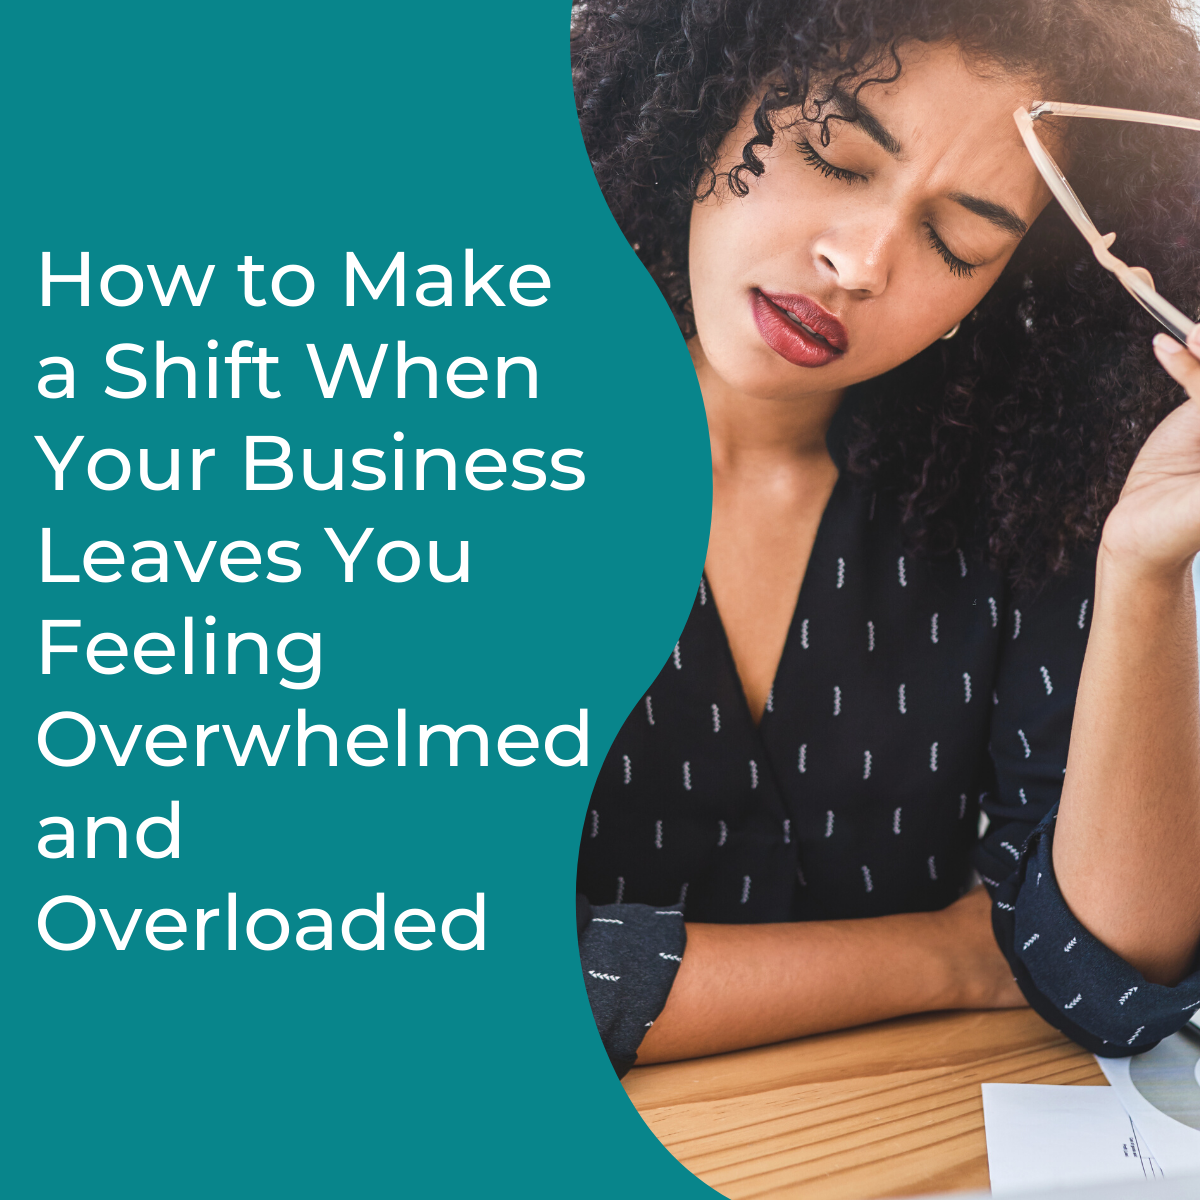 the words "How to Make a Shift When Your Business Leaves You Feeling Overwhelmed and Overloaded" to the left of an image of a woman sitting with her eyes closed holding her glasses in her hand up to her head